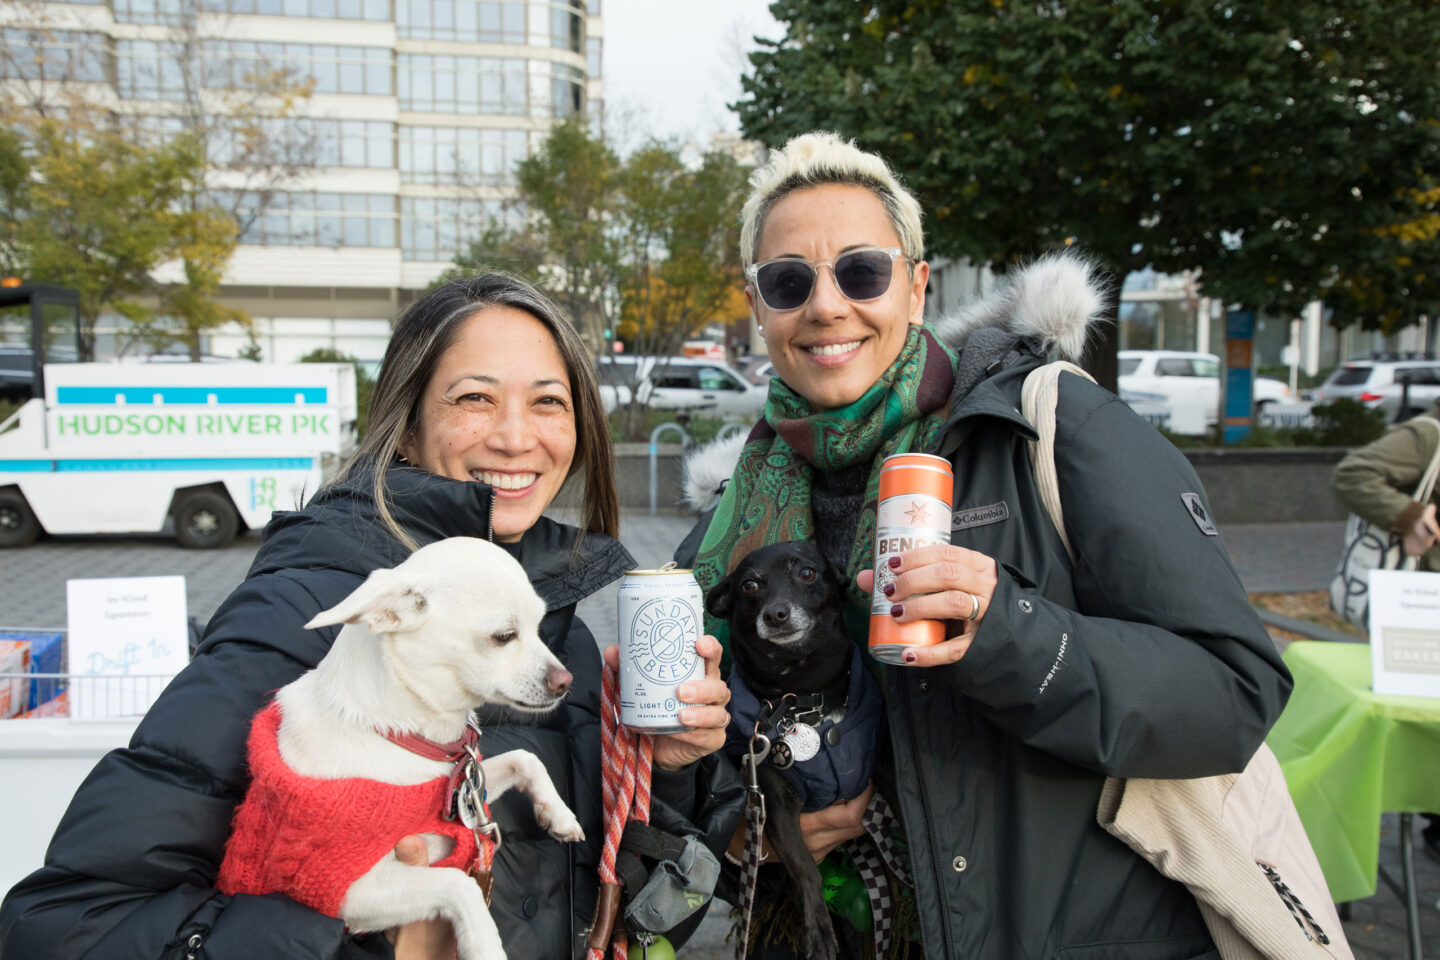 Two smiling women both hold a dog and a sponsored beer in each hand at Hudson River Park Friends' Barktoberfest